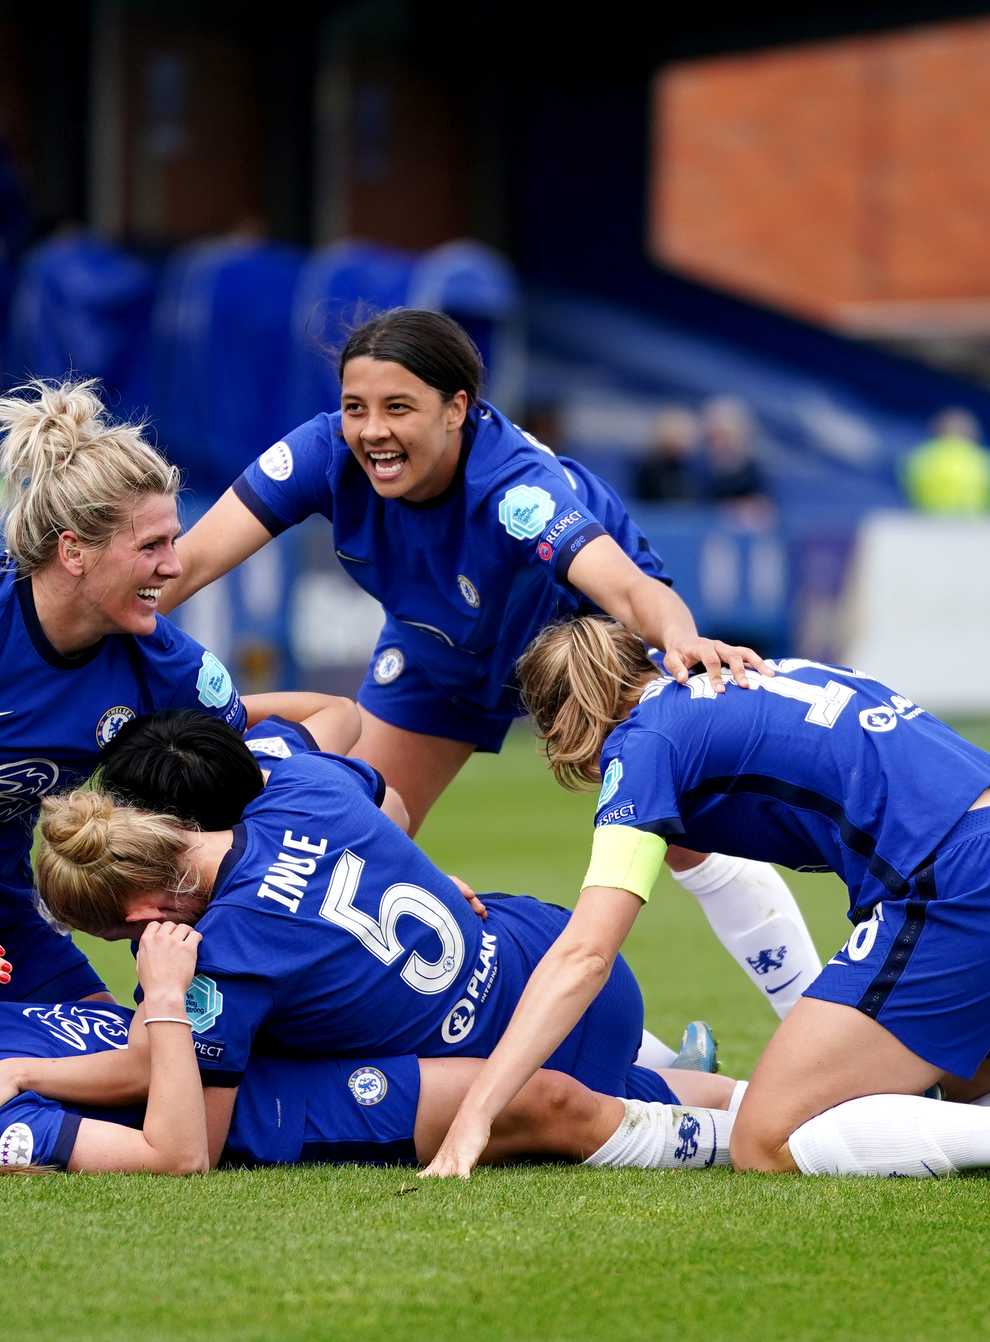 Chelsea reached the Women's Champions League final after getting past Bayern Munich in the semis (John Walton/PA).